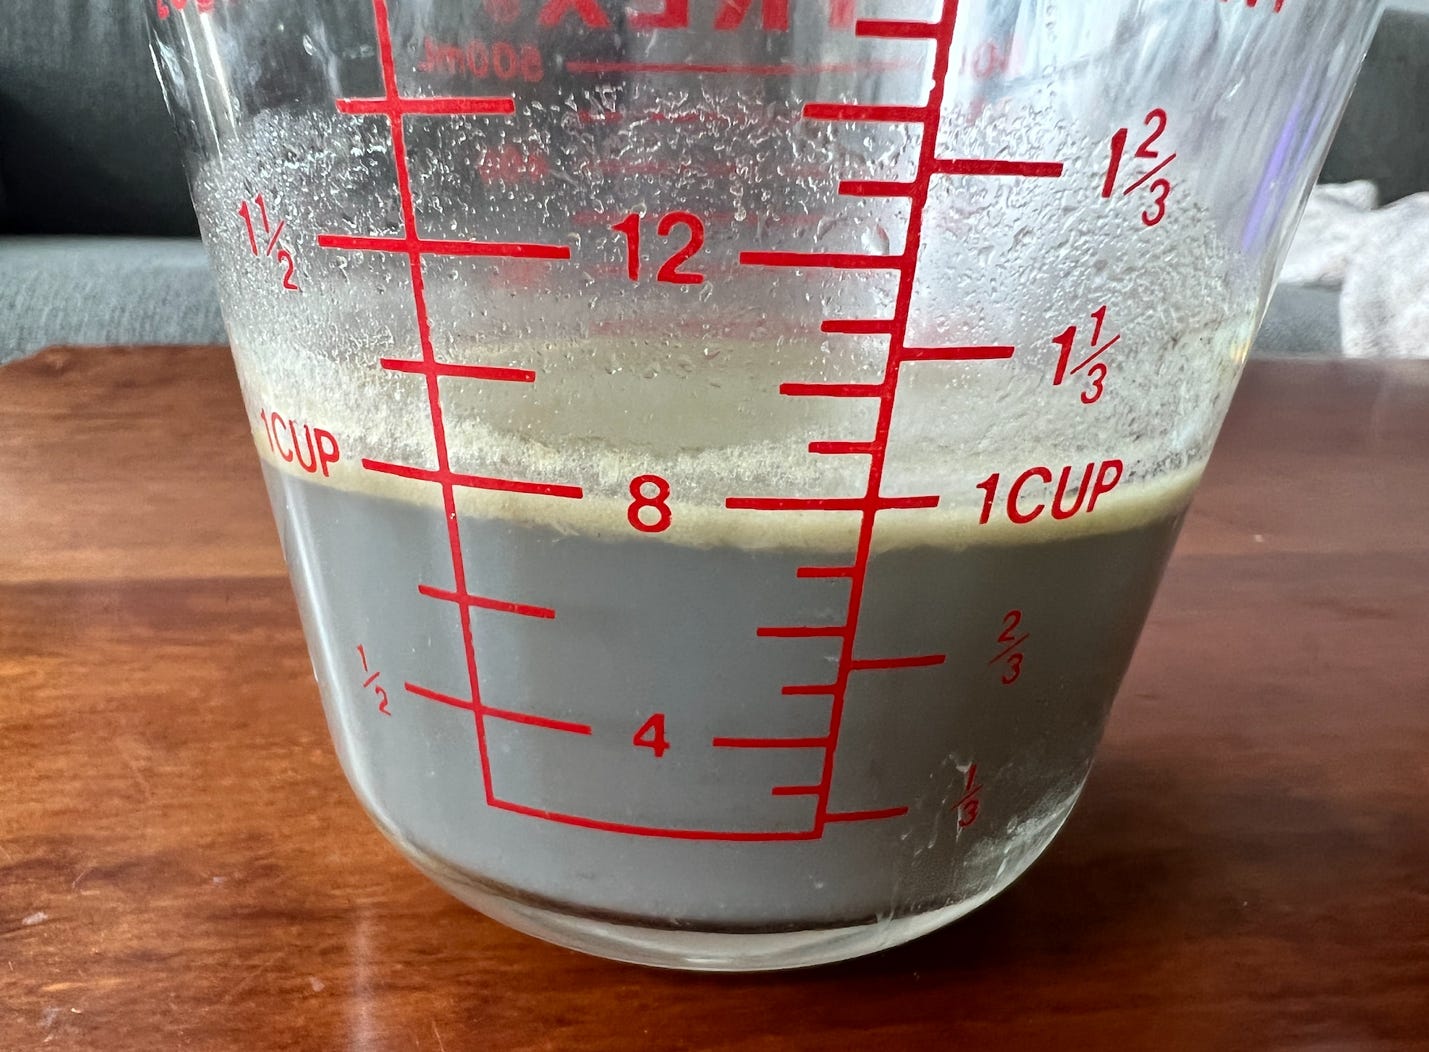 A close-up of a measuring cup

Description automatically generated with low confidence